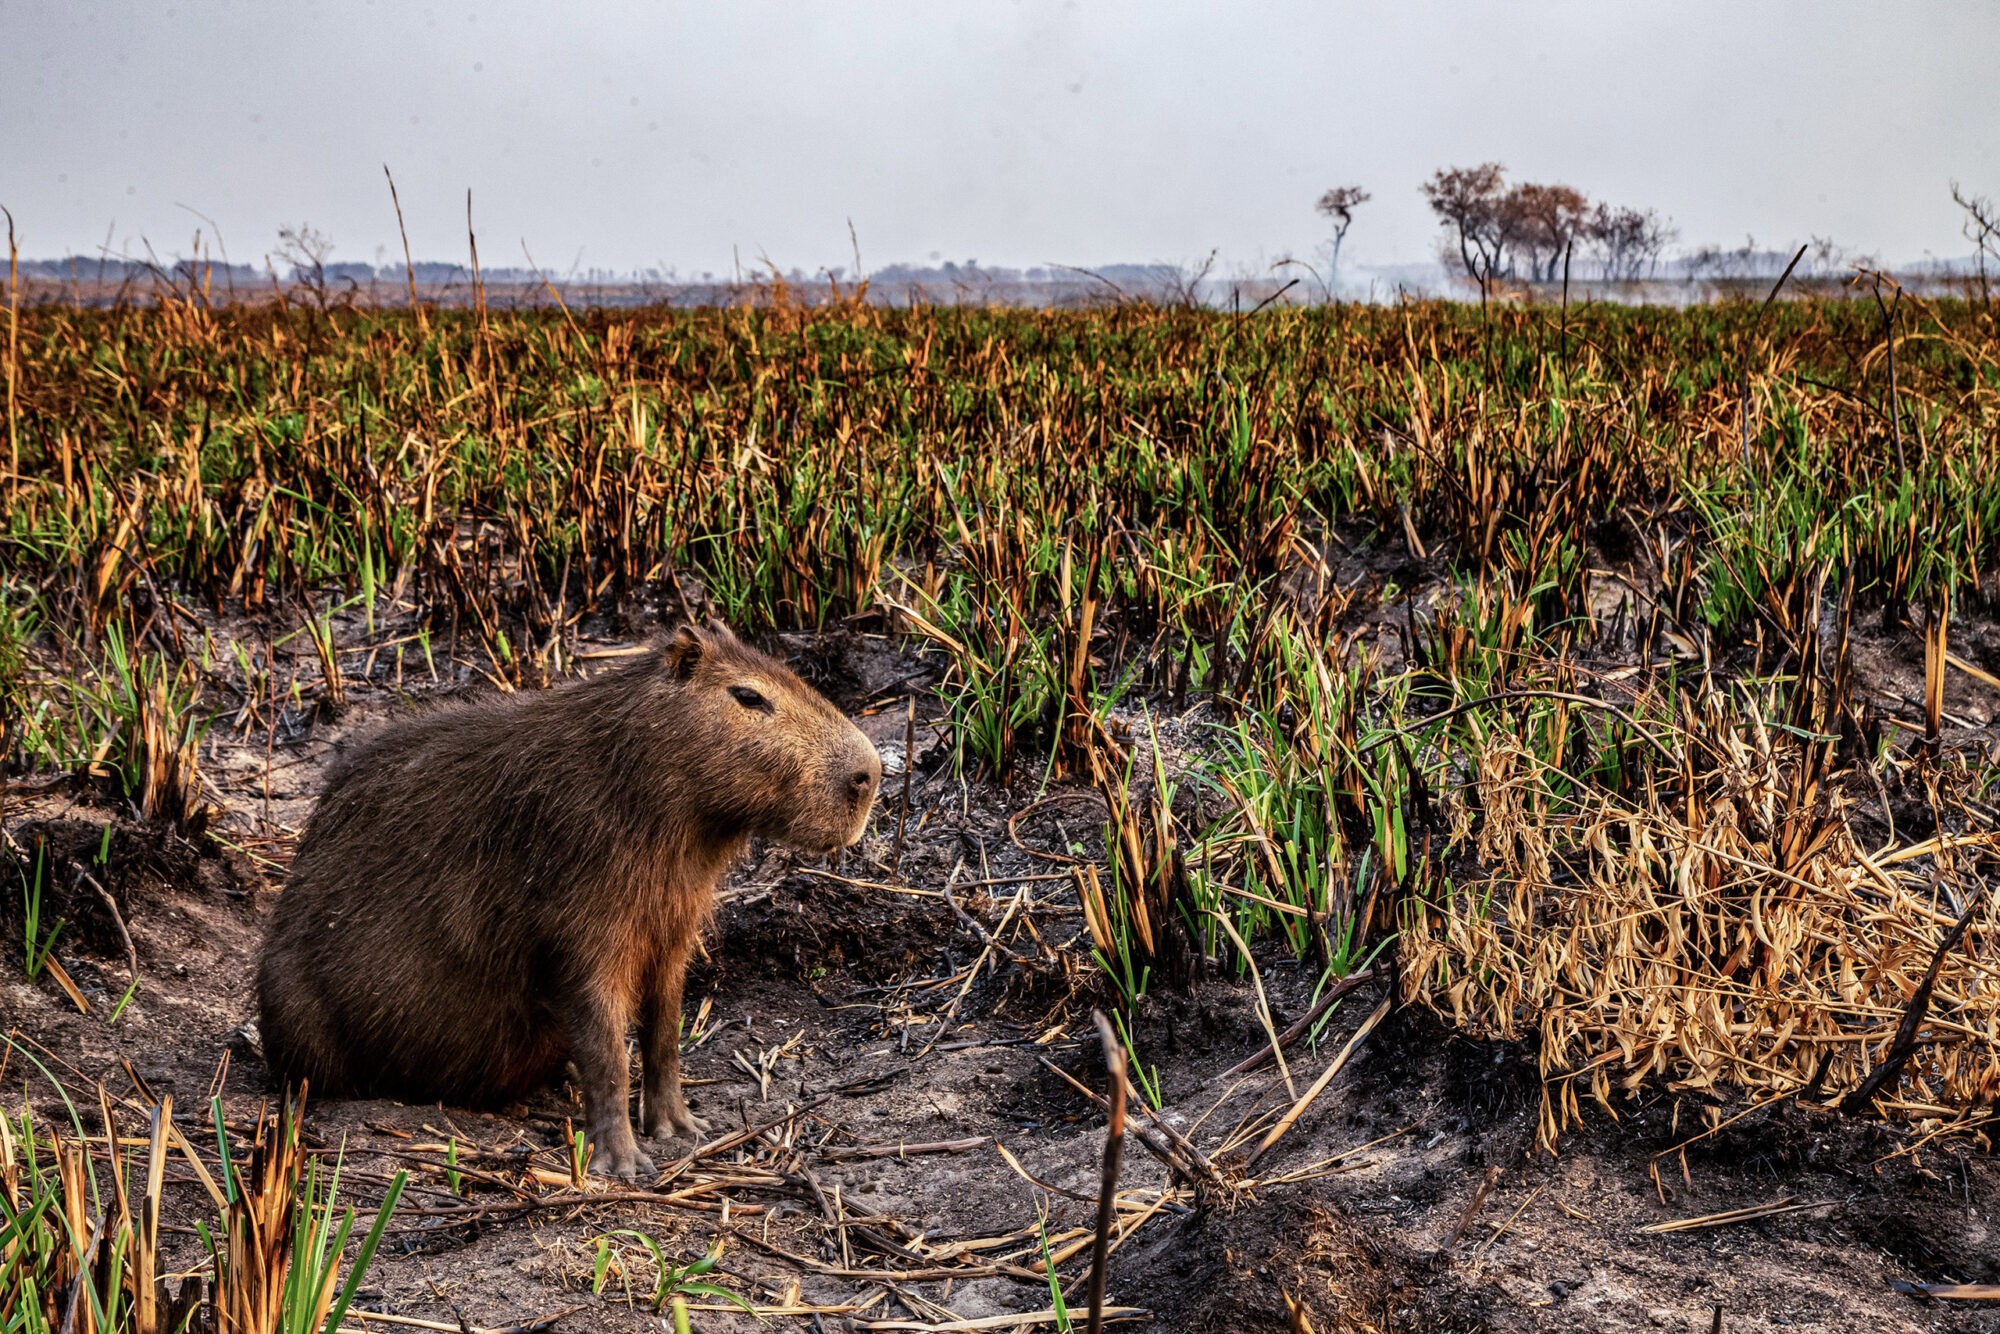 <p><span style="font-weight: 400;">A capybara, a giant rodent native to South America, in a deforested wetland area in the Argentine province of Corrientes (Image © Emilio White / Greenpeace)</span></p>